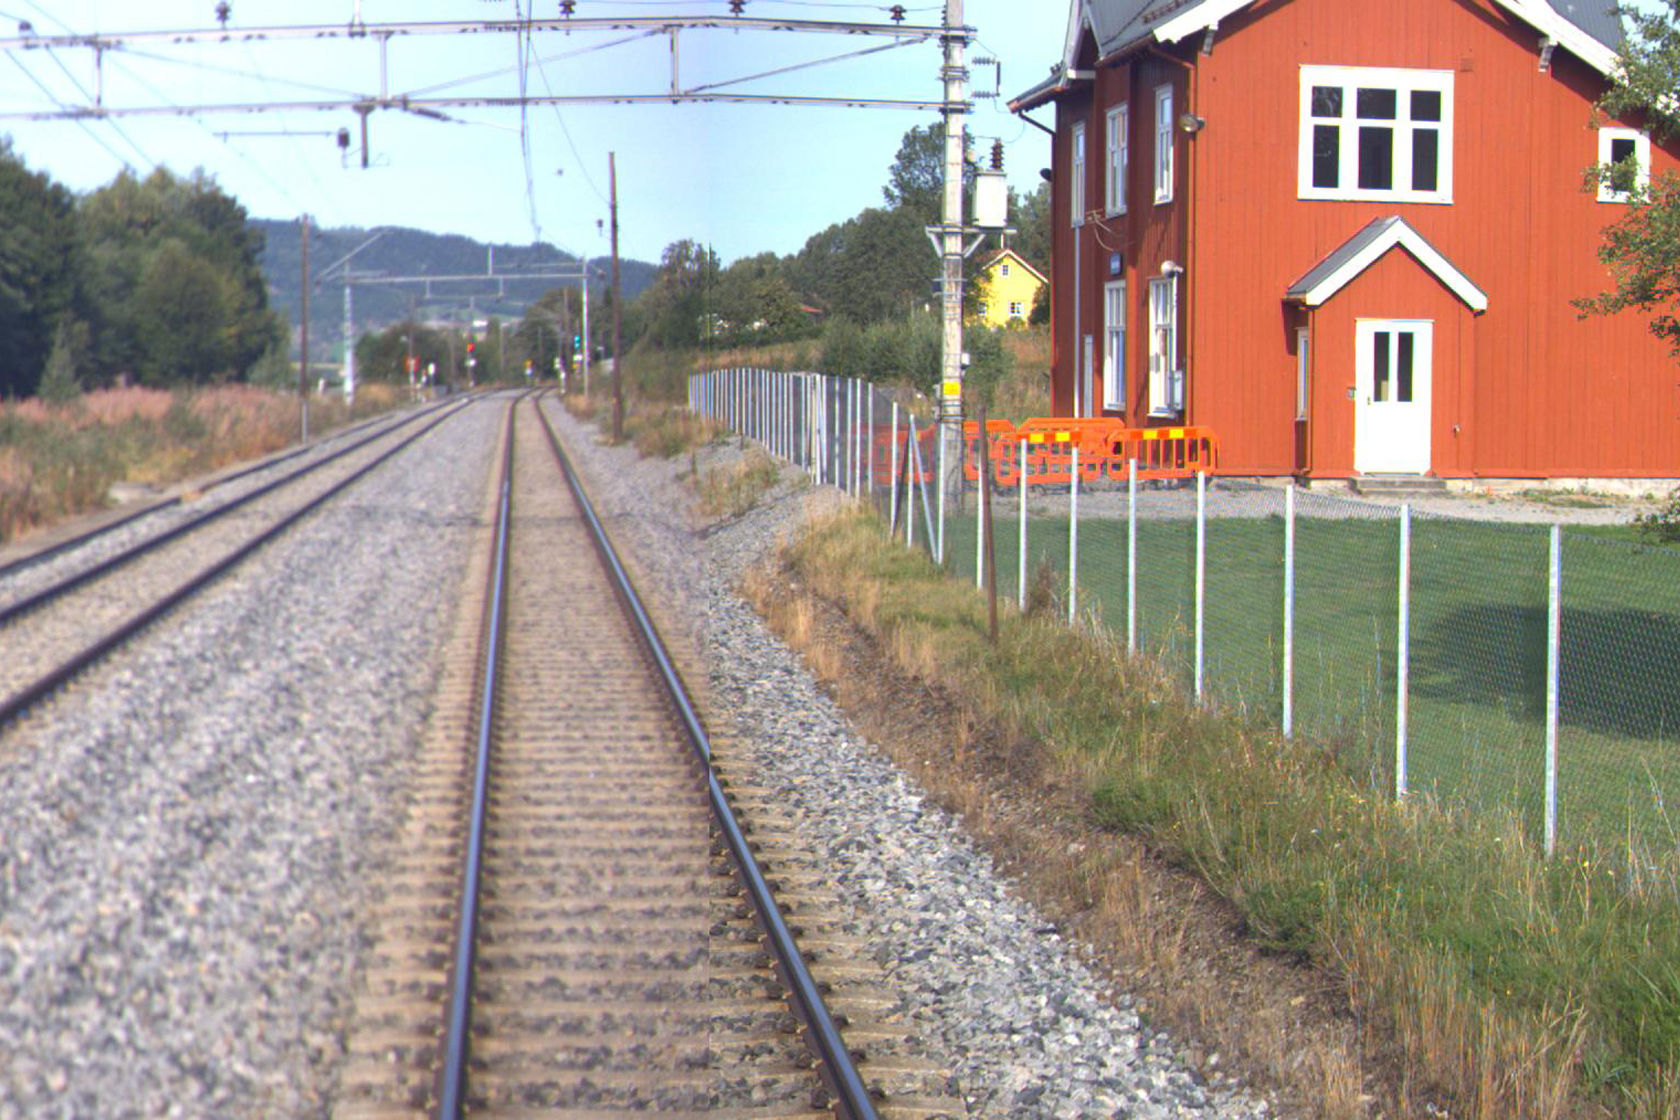 Tracks and station building at Jessnes station